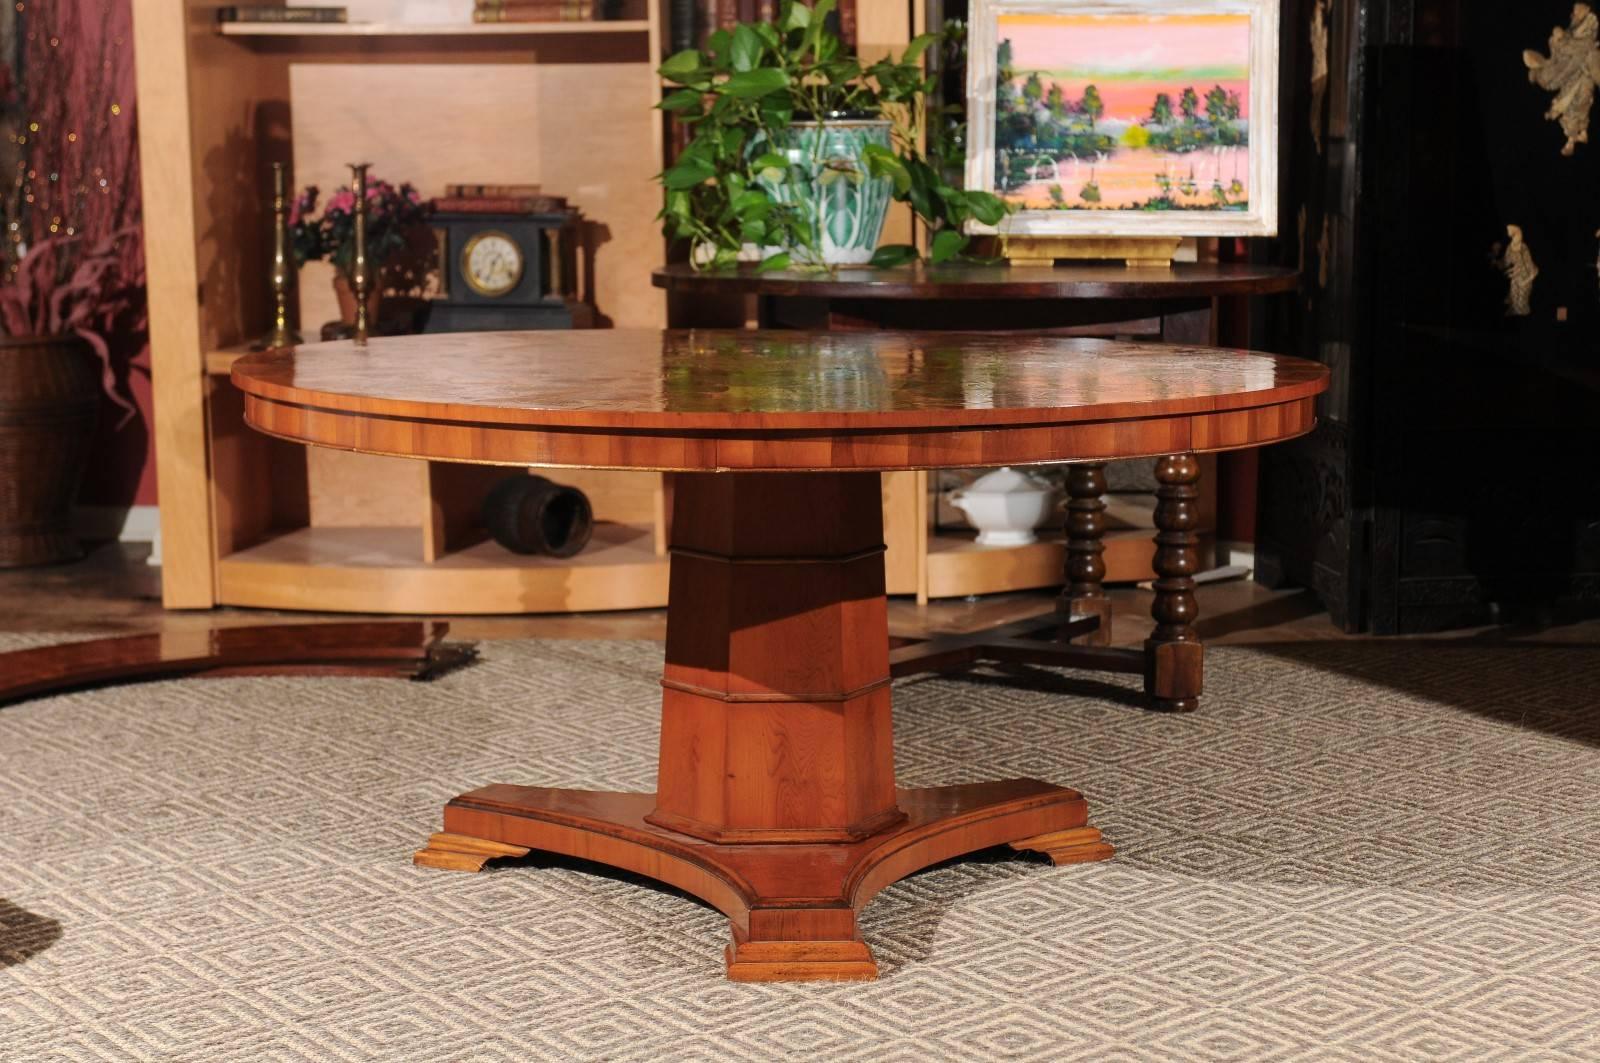 This is a beautiful vintage table. Notice the wonderful design on the top. It also would be a fabulous center table in a large foyer. The table in 60 in. Diameter without the leaves. With the leaves it is 80 in. D. Four drawers surround the table